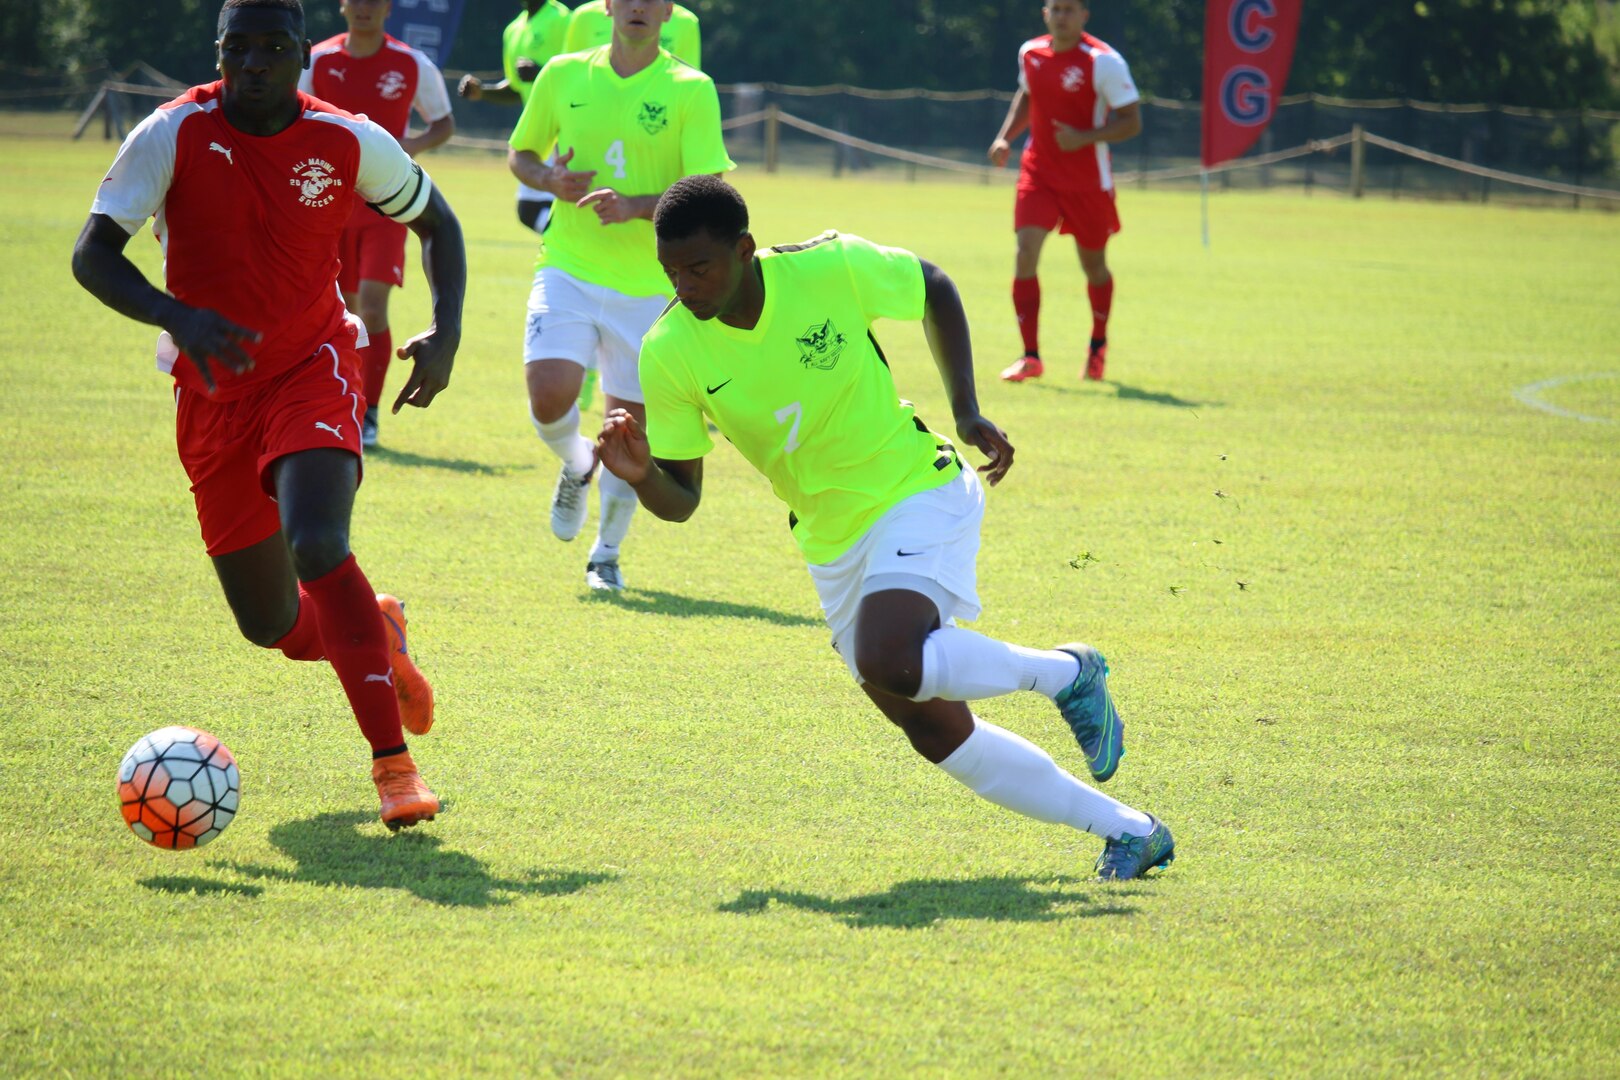 Petty Officer 2nd Class Kyle Baker (Yellow #7) drives down the field against Marine Cpl. Adrian Brown (left). Baker scored the go ahead goal lifting Navy over the Marines for the 2-1 win in match five of the 2016 Armed Forces Men's Soccer Championship hosted at Fort Benning, Ga from 6-14 May 2016.  Navy advances to the Championship Match versus Air Force.